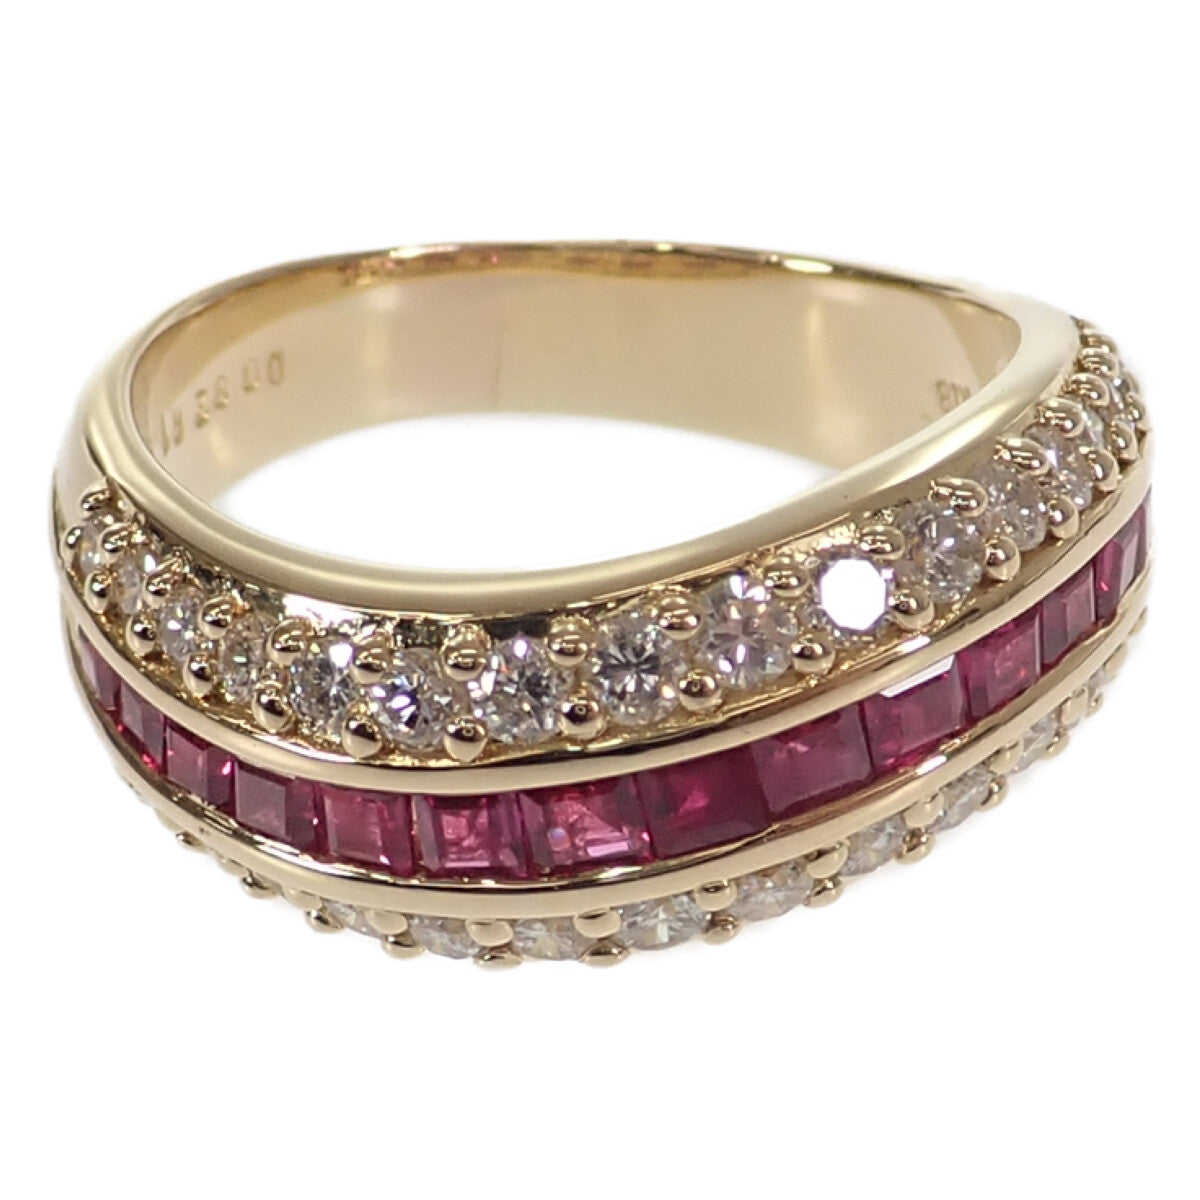 [LuxUness]  K18YG Wave Design Ring - 0.82ct Diamond & 1.18ct Ruby, Size 14 in Excellent condition